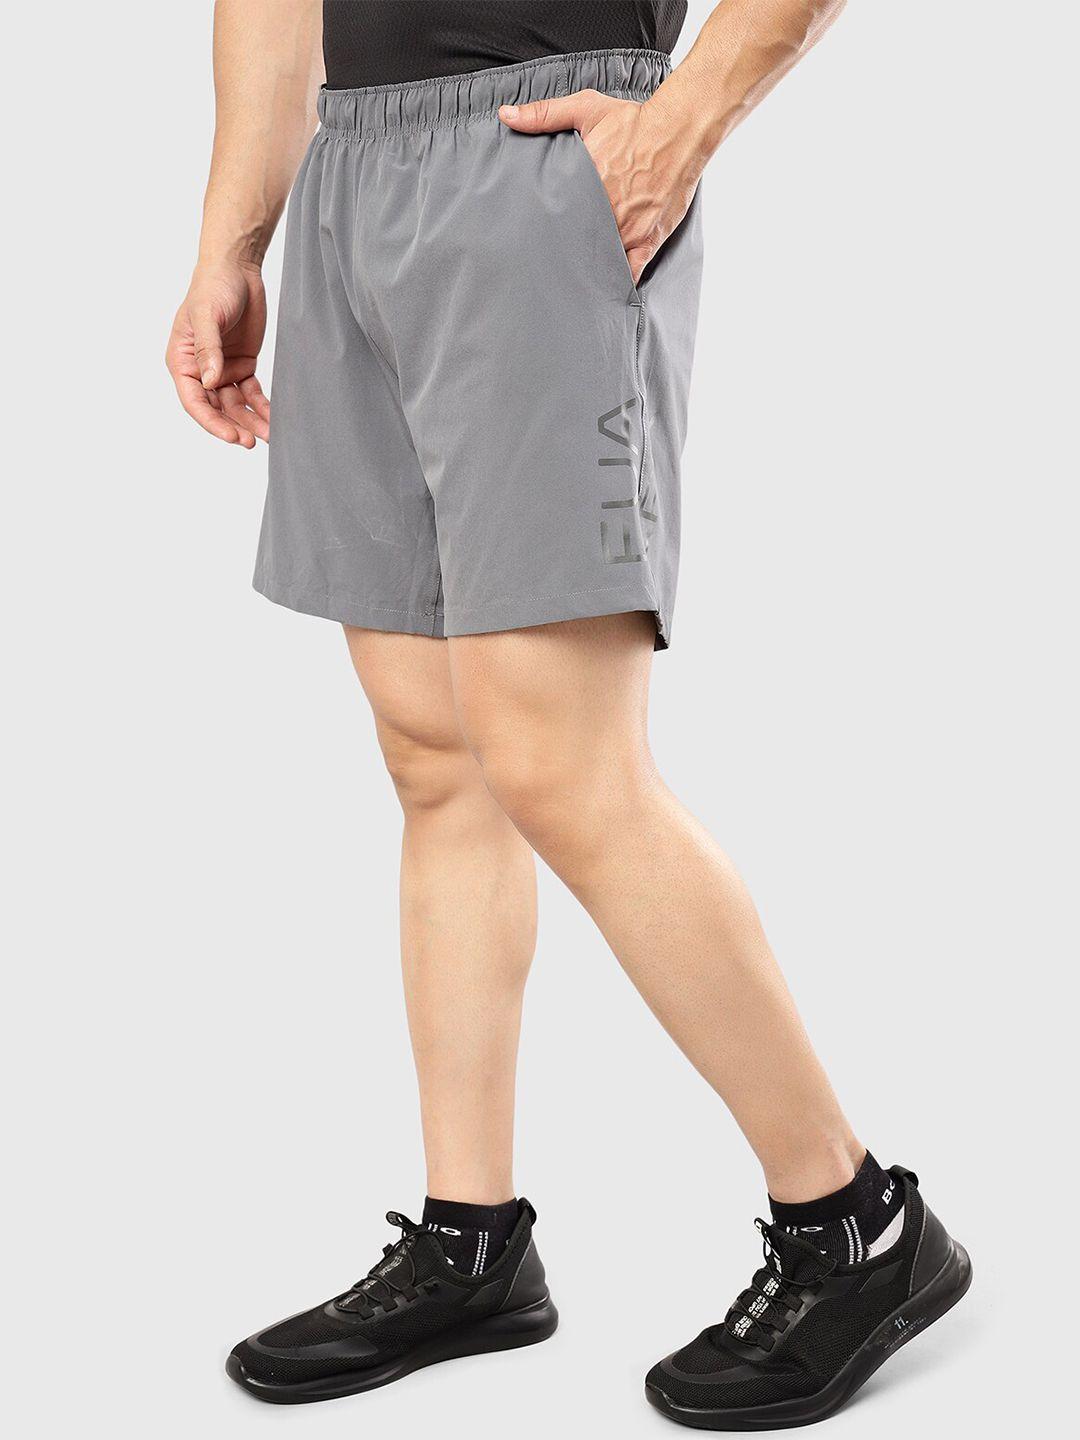 fuaark mid rise above knee length sports shorts